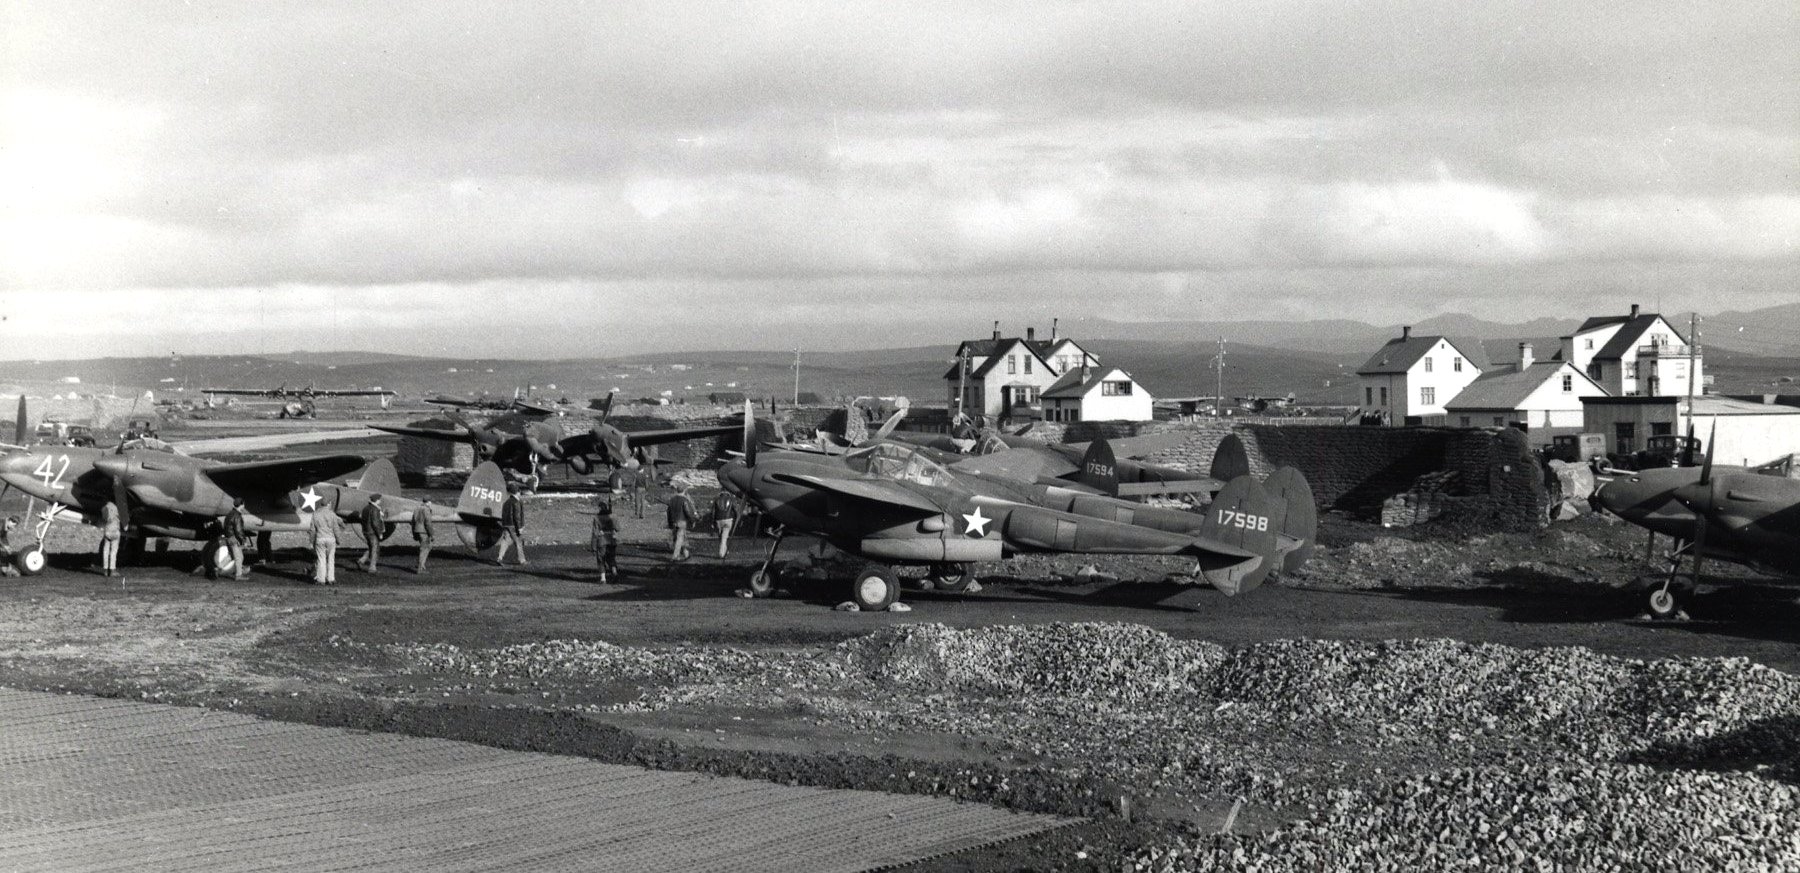 P-38F Lightings refuel in Iceland on their way to Britain, mid-1942. Note PBY Catalina.